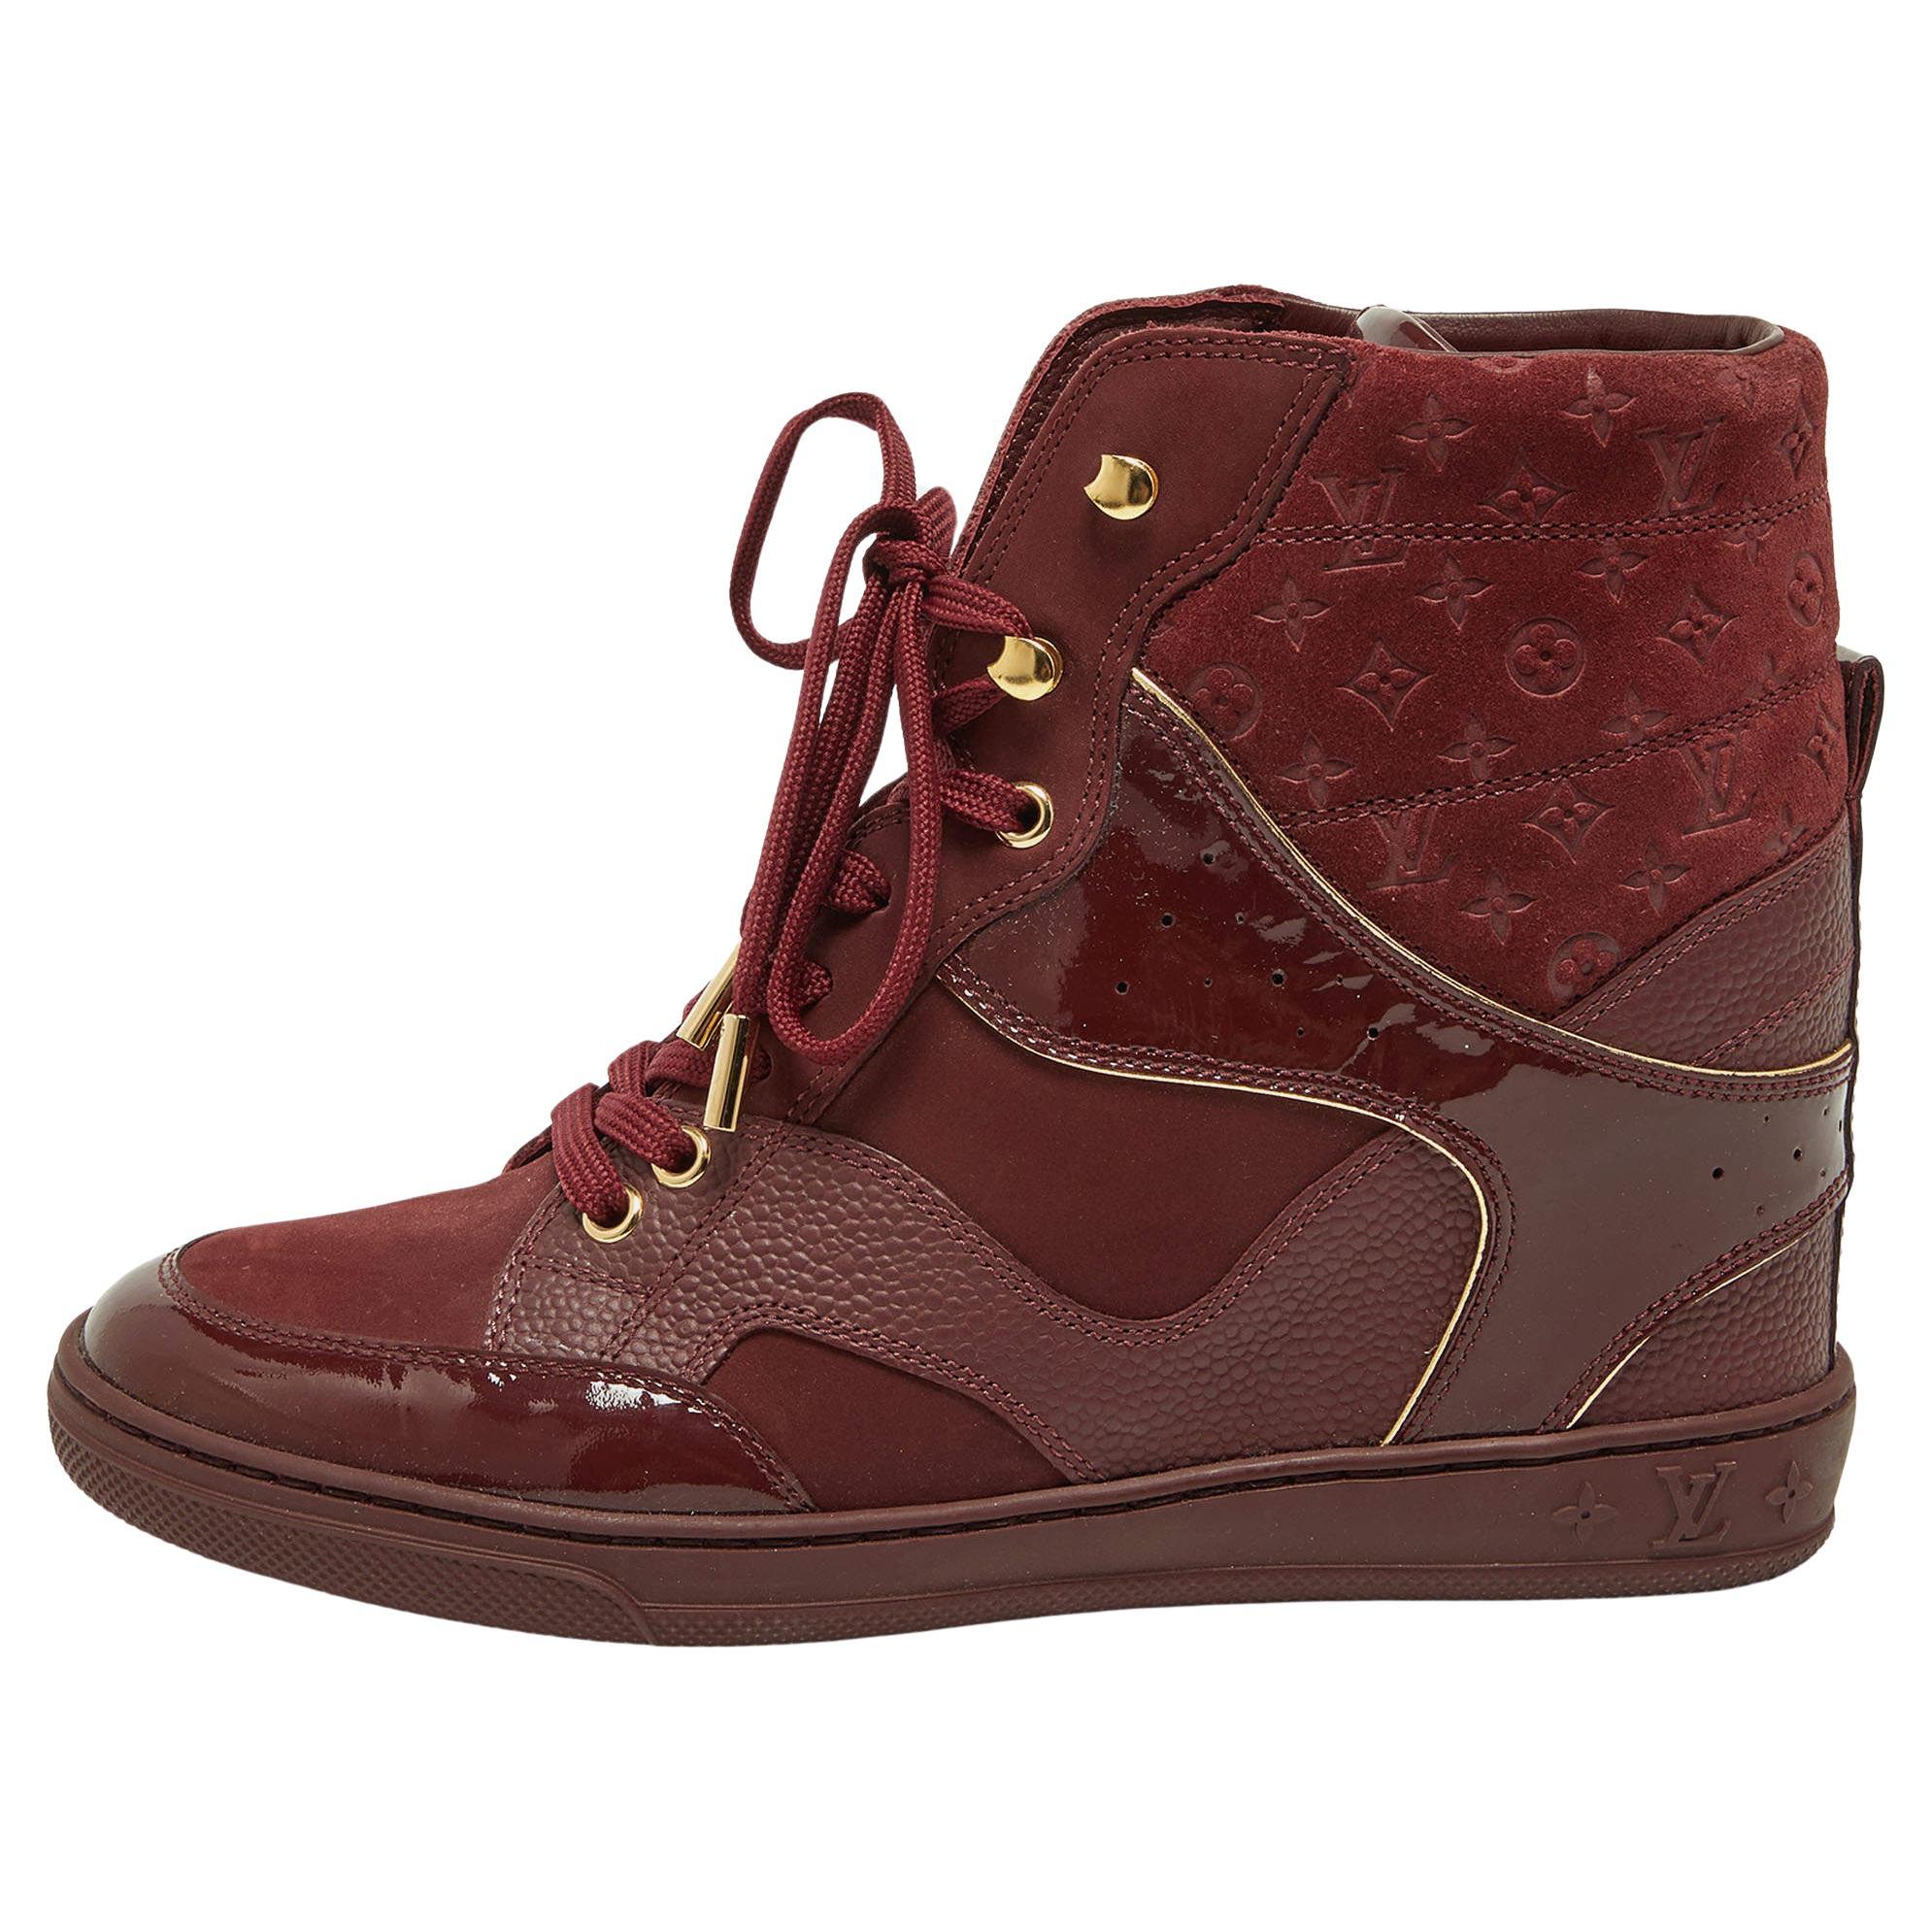 Louis Vuitton Burgundy Monogram Suede and Leather Millennium Wedge Sneakers 